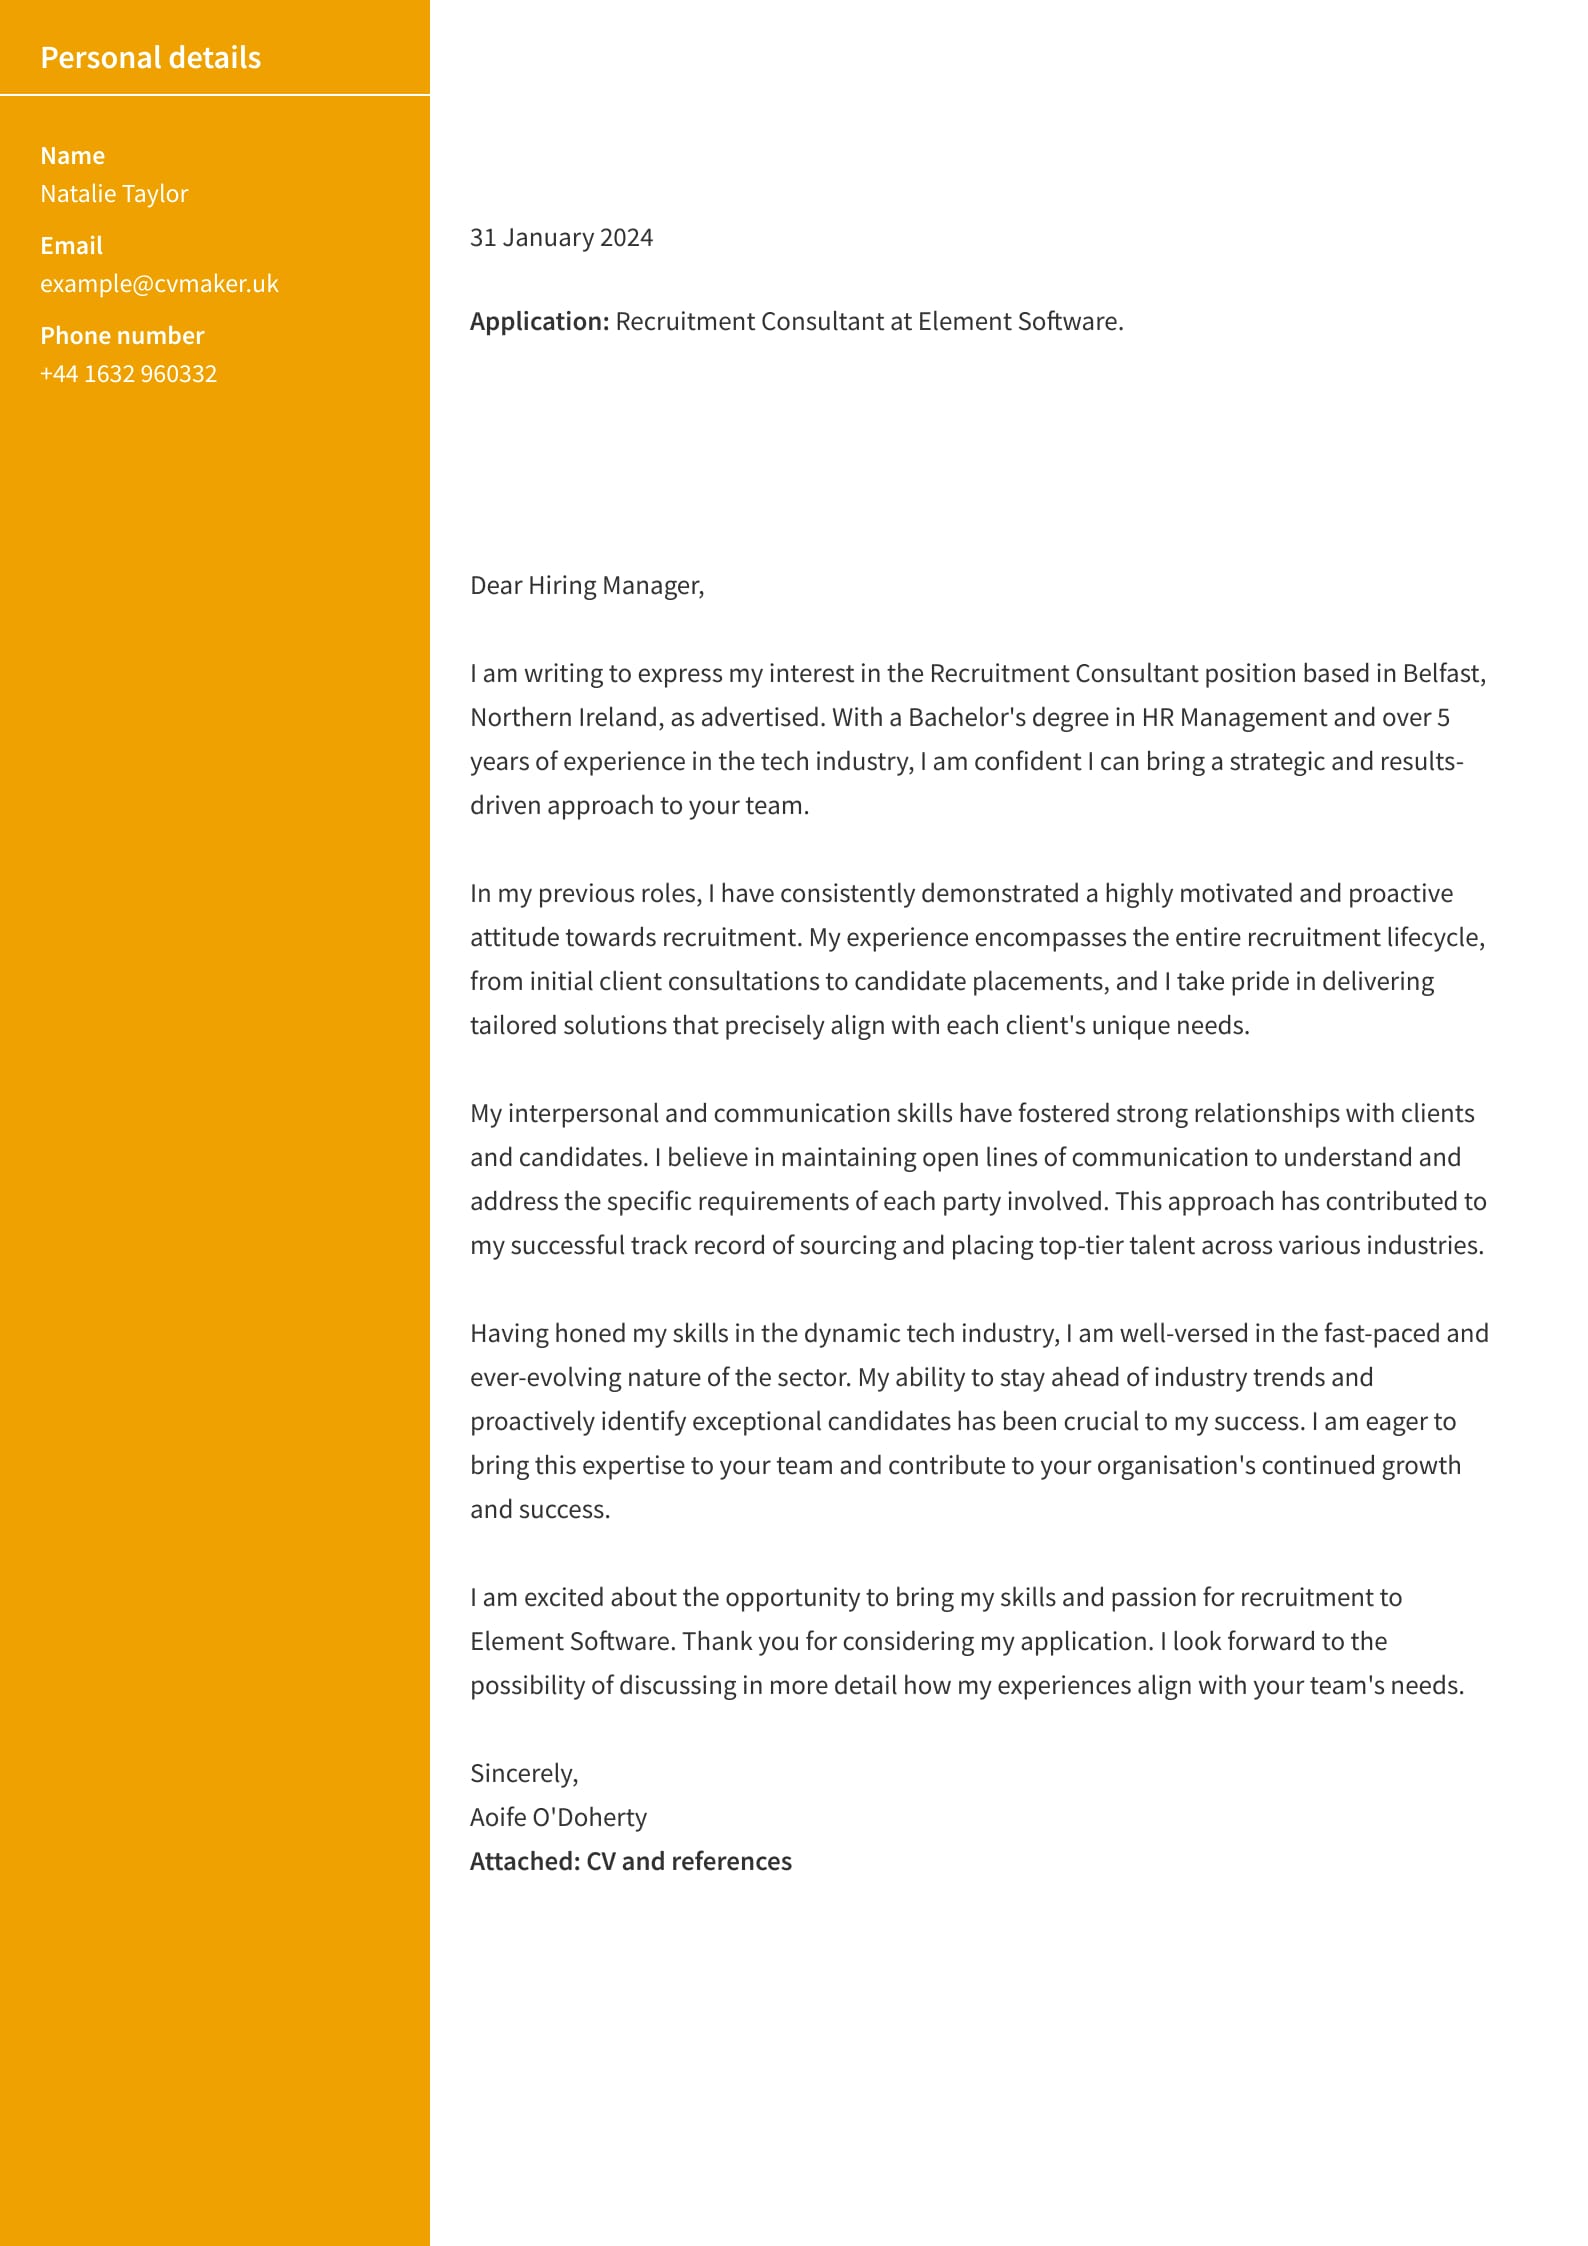 Cover Letter example - Recruitment - Stanford template